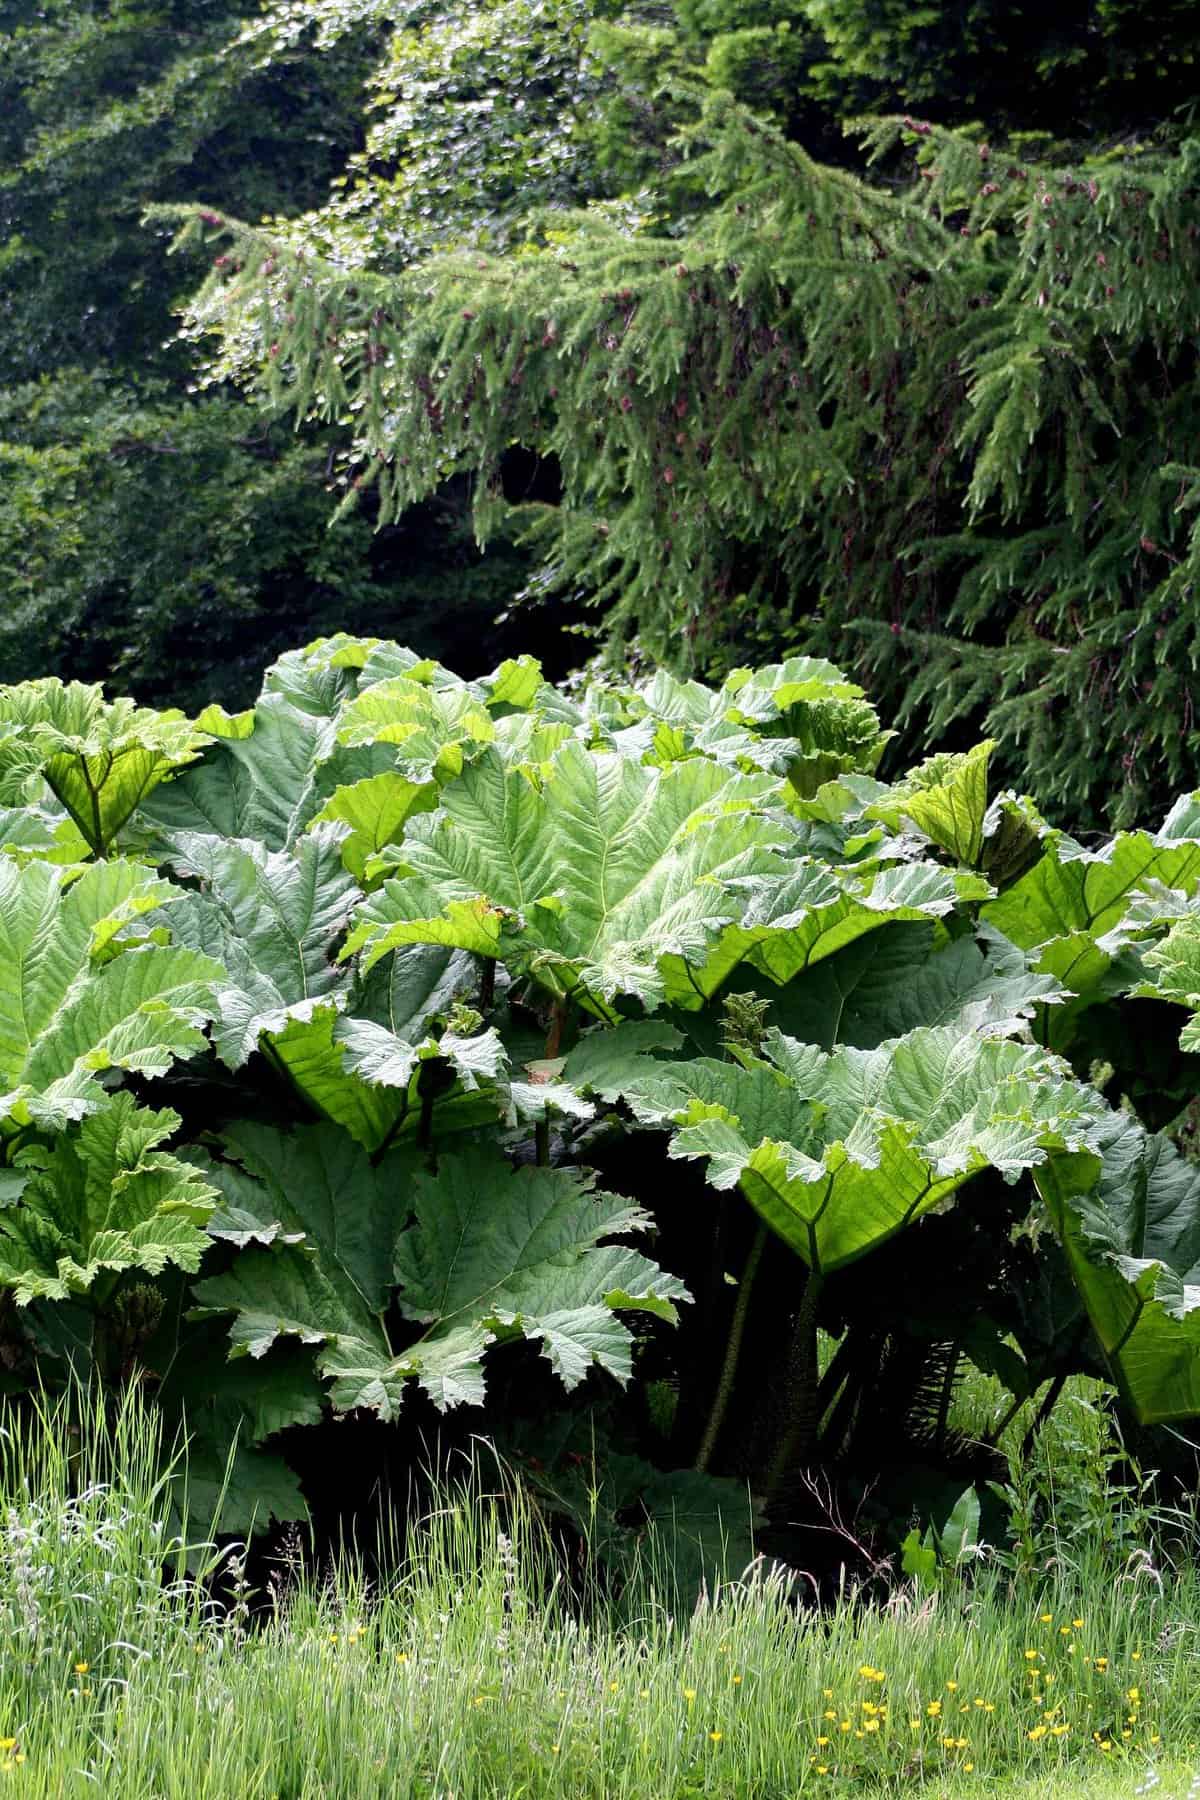 Large green gunnera plants in a lush garden, with towering trees and dense foliage in the backdrop.